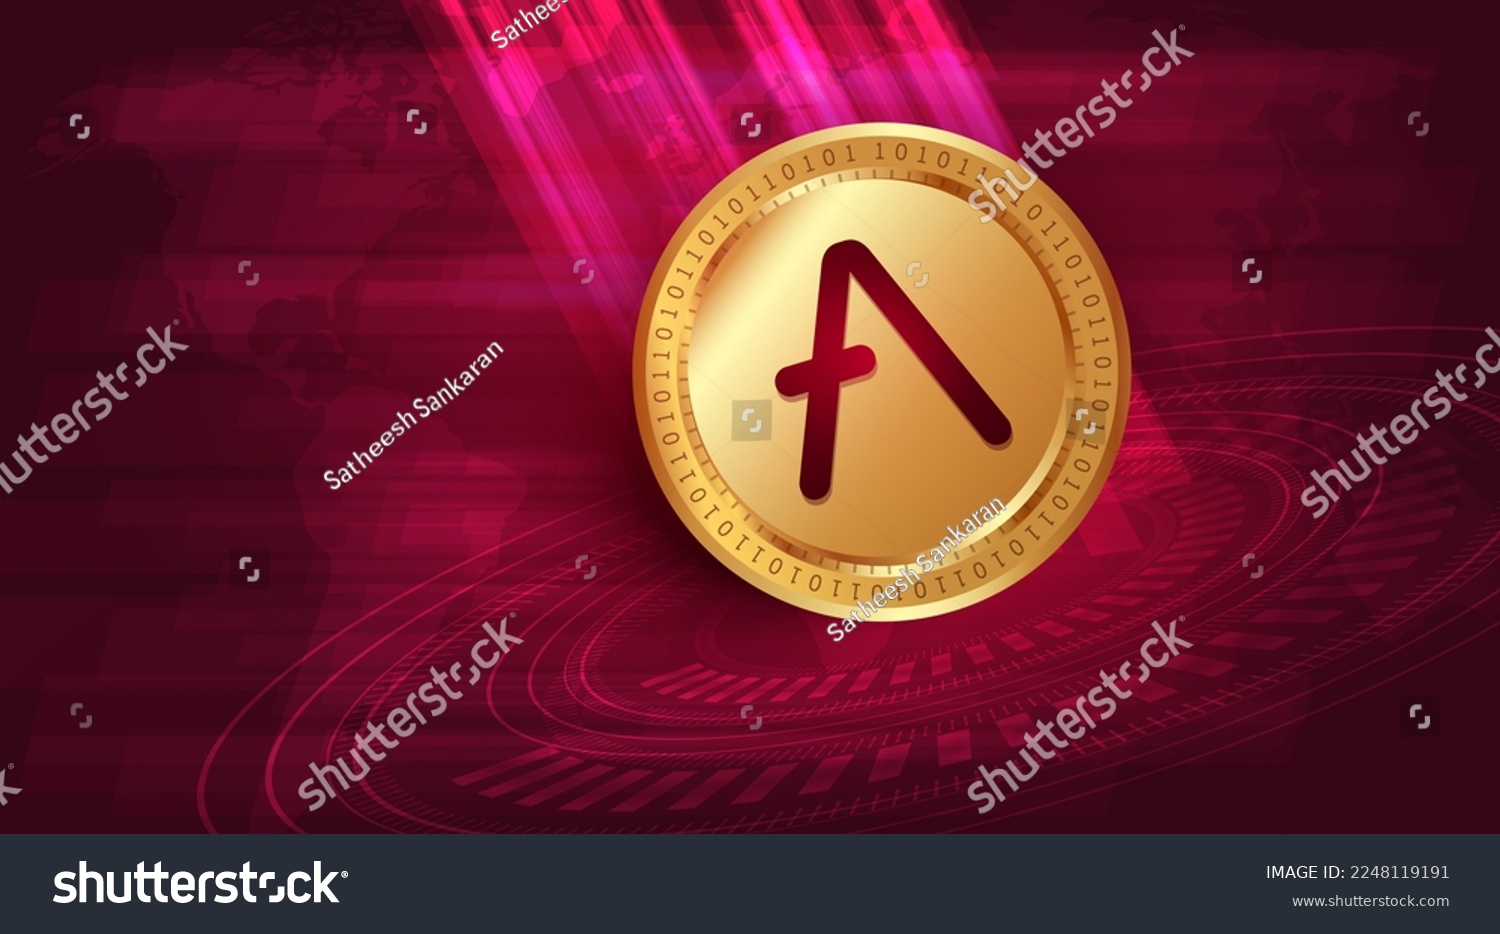 SVG of Aave (AAVE) crypto currency banner and background svg